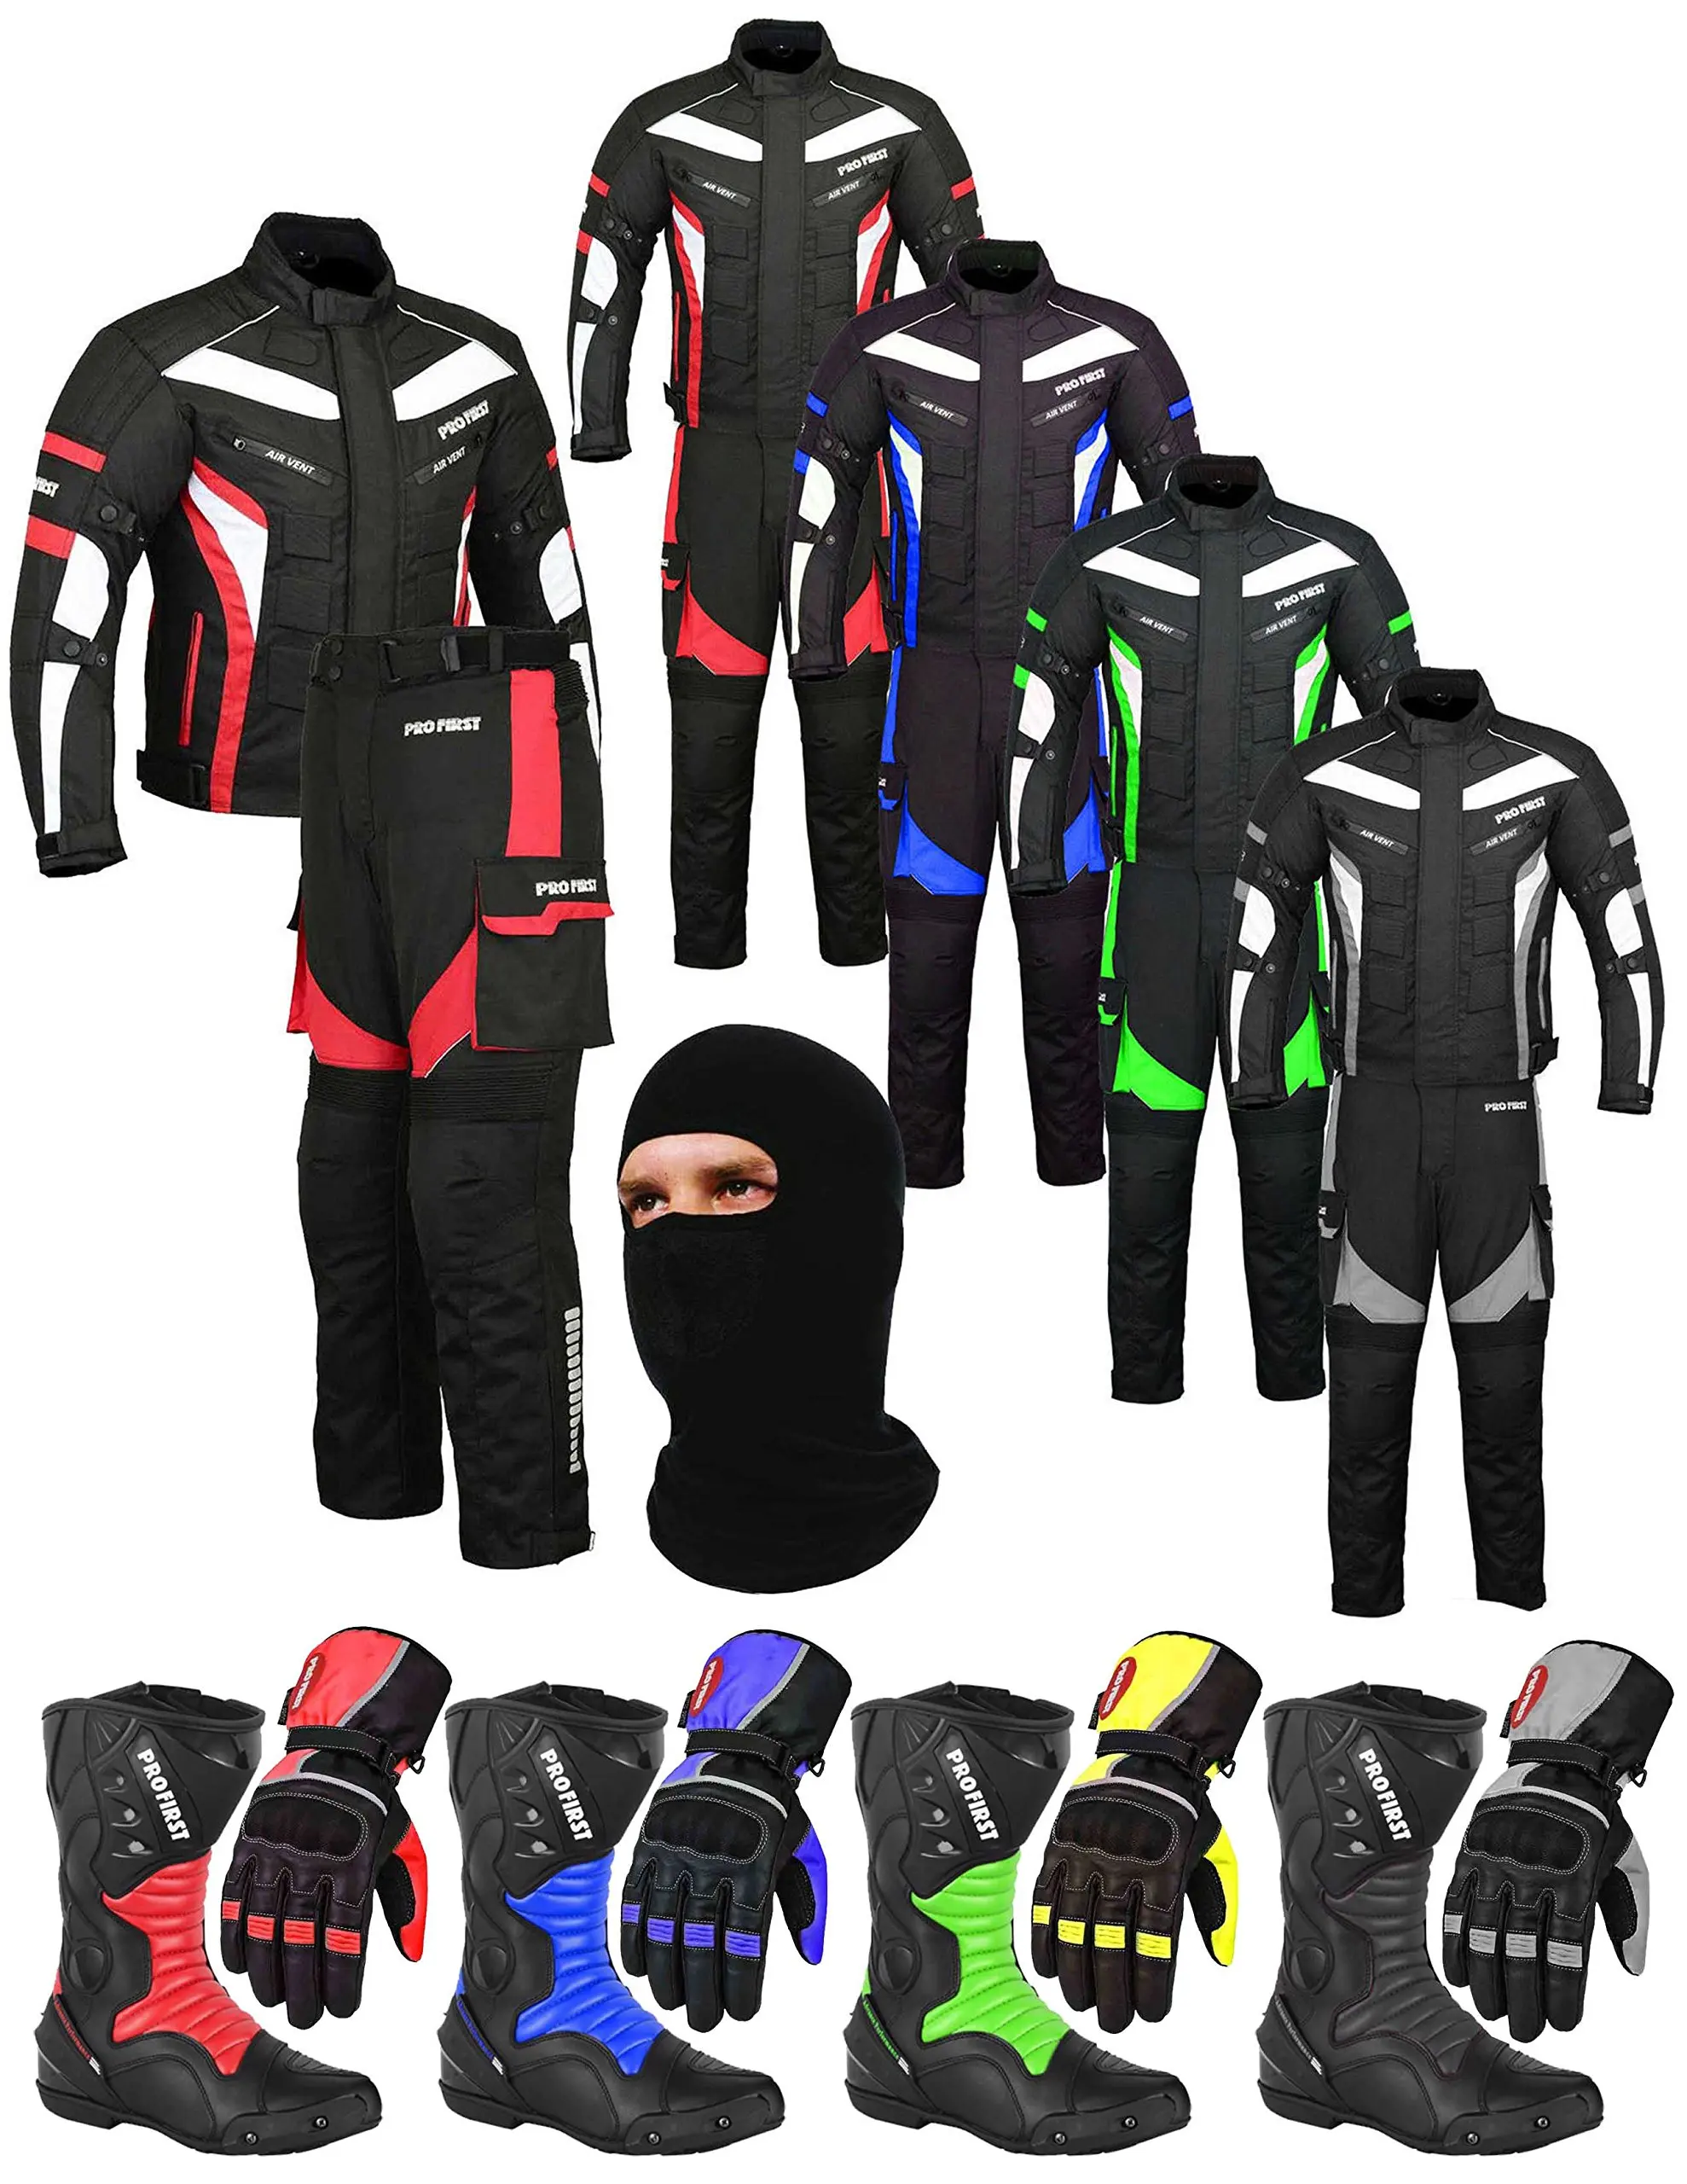 Trouser A Full Set of Waterproof Motorbike Motorcycle Moped 2 Piece Suit in Cardura Fabric and CE Approved Armor Jacket Red – Medum-29” Leg Gloves Boots Balaclava Racing Touring Event-